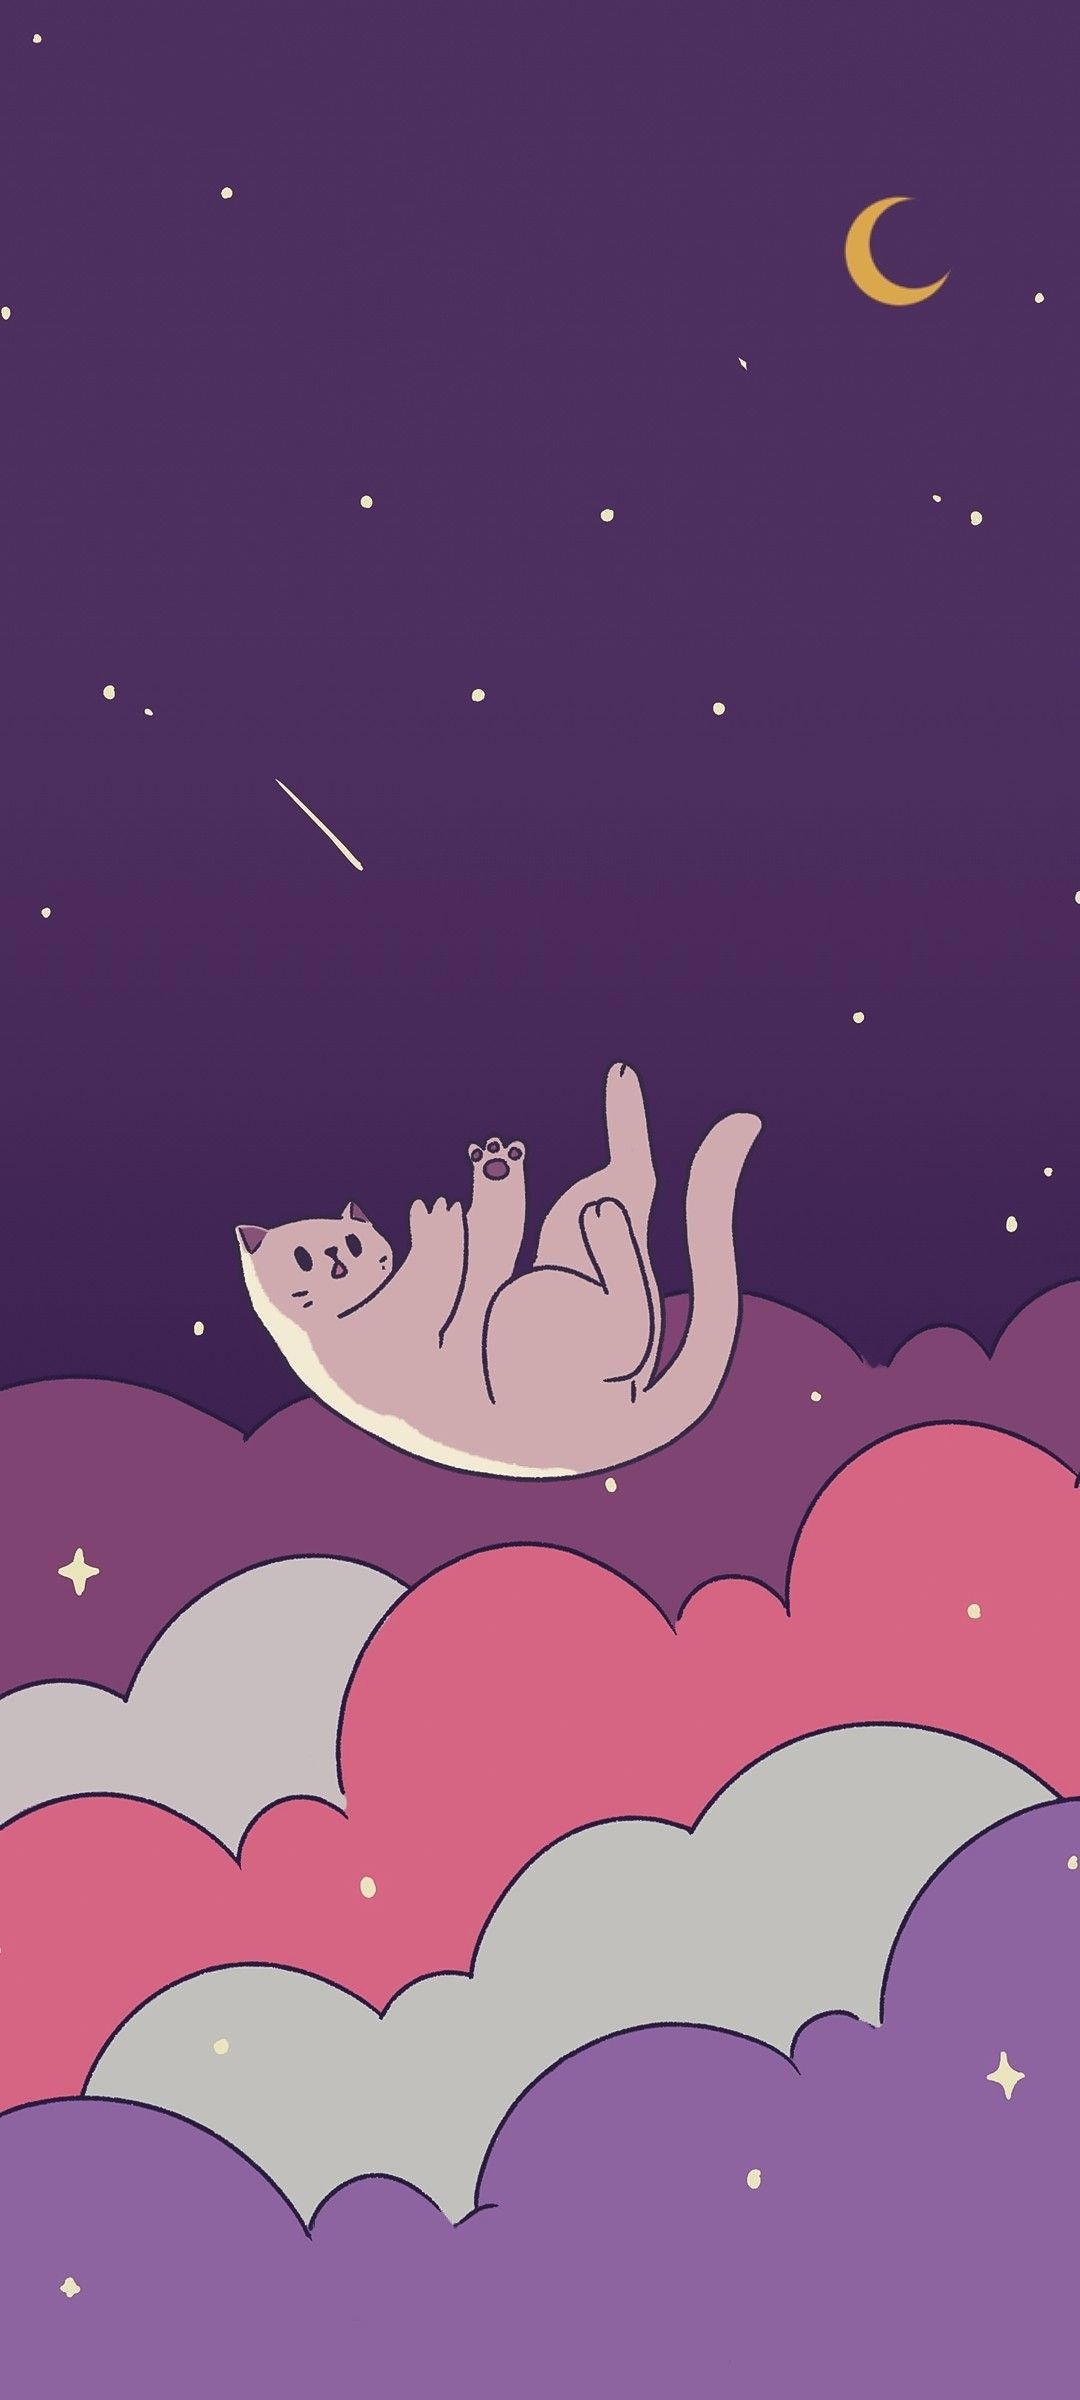 IPhone wallpaper of a cat laying on a cloud in the night sky - IPhone, cute, cat, illustration, pretty, cute iPhone, clean, constellation, HD, cool